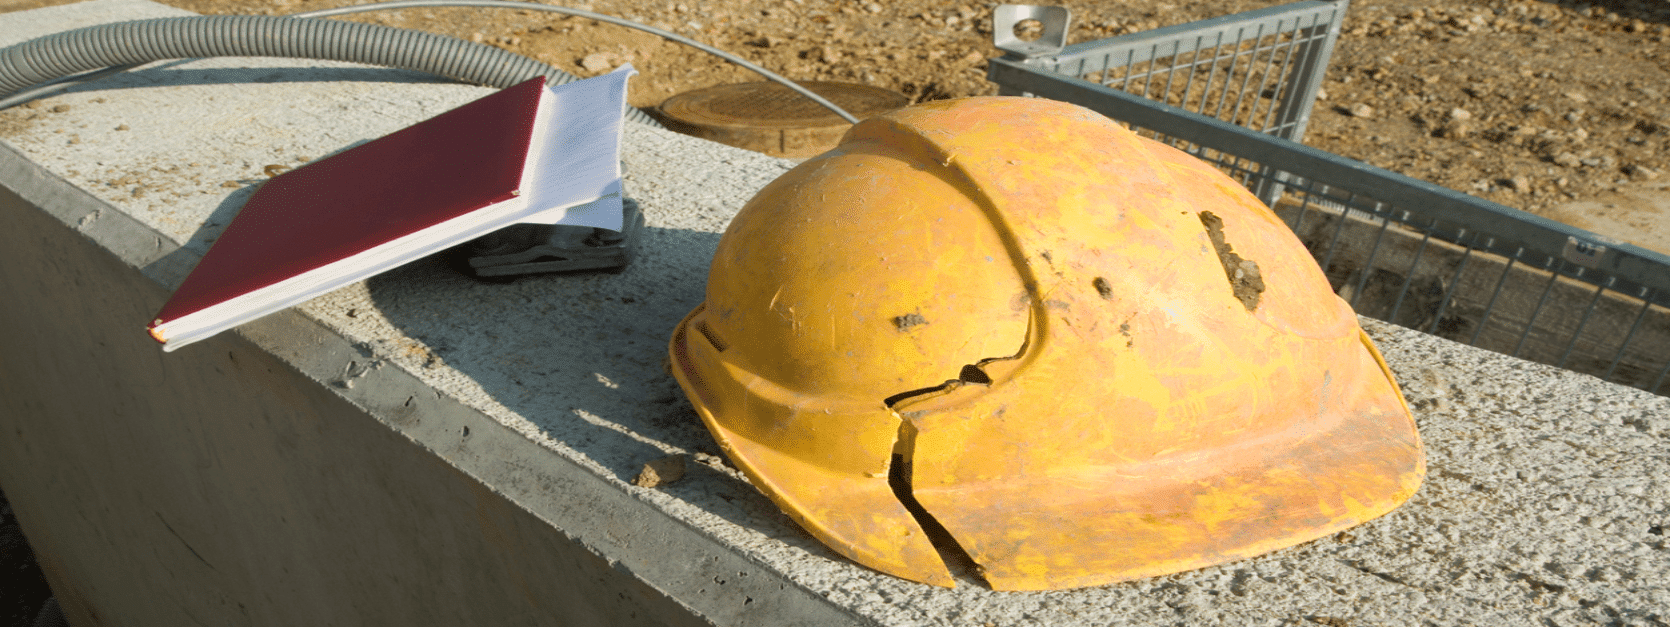 Many Construction Accident Cases Have High Settlements and Verdict